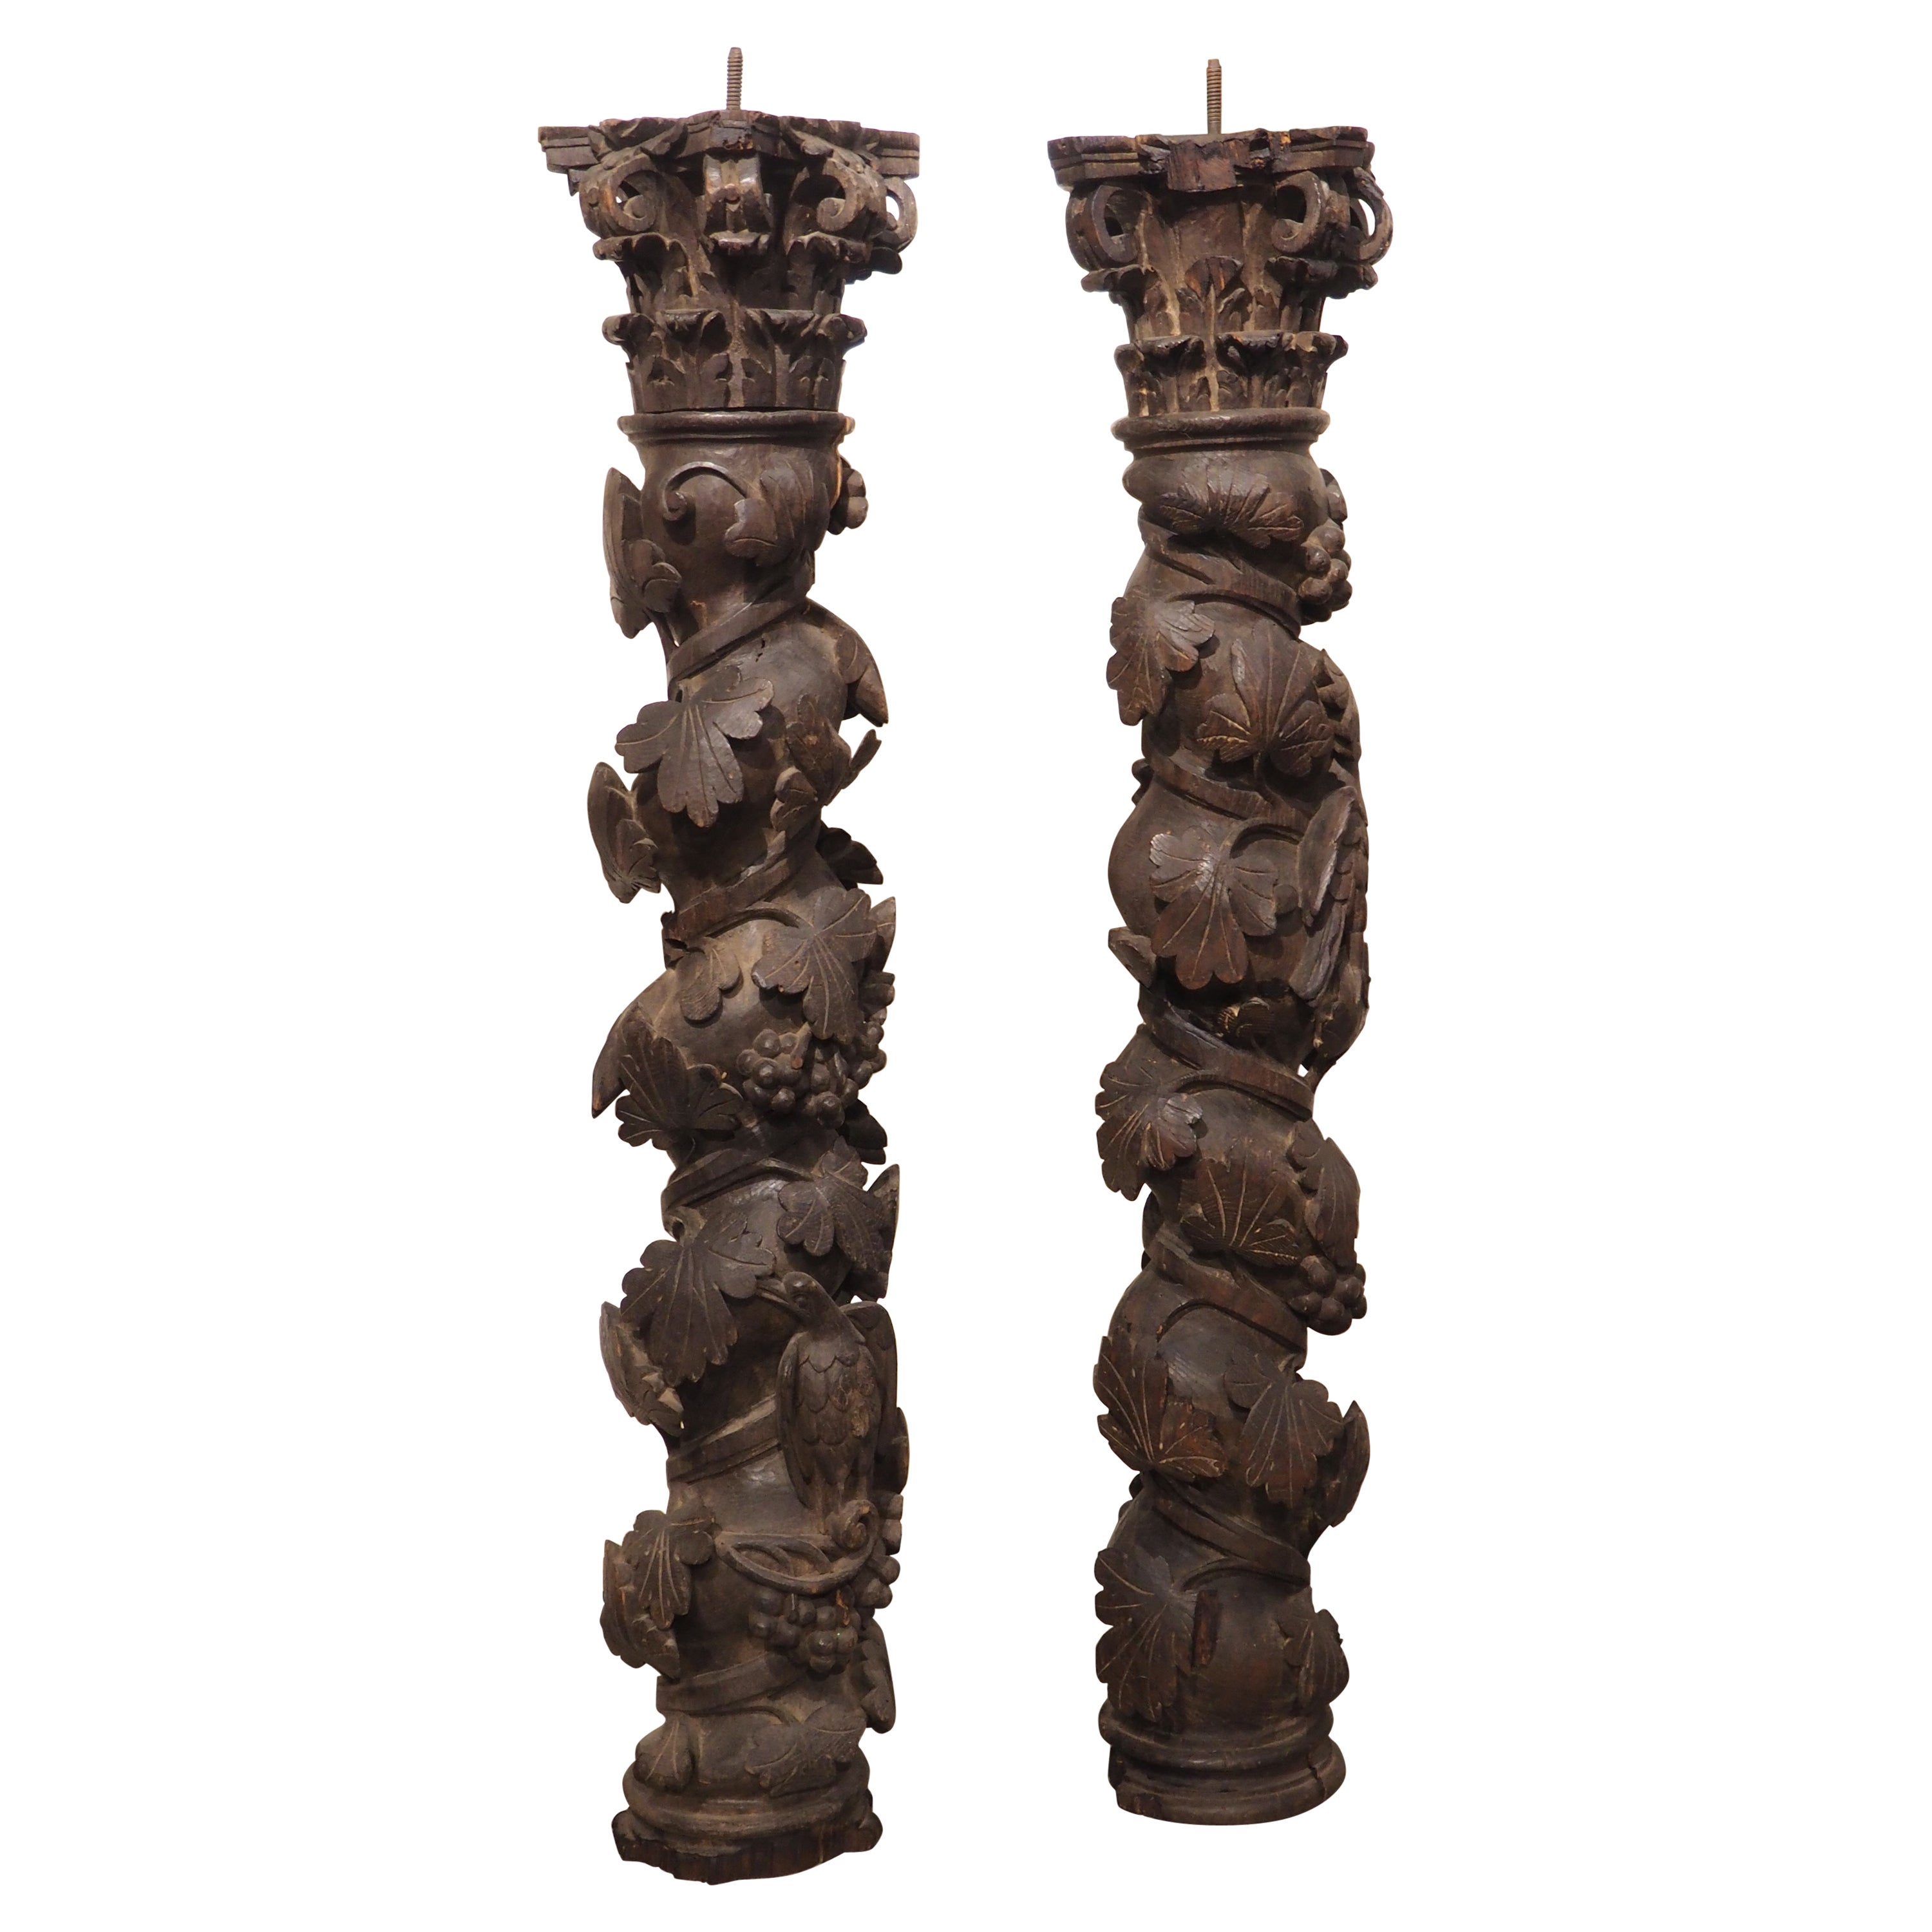 Pair of 18th Century Carved Chestnut Solomonic Columns from Portugal